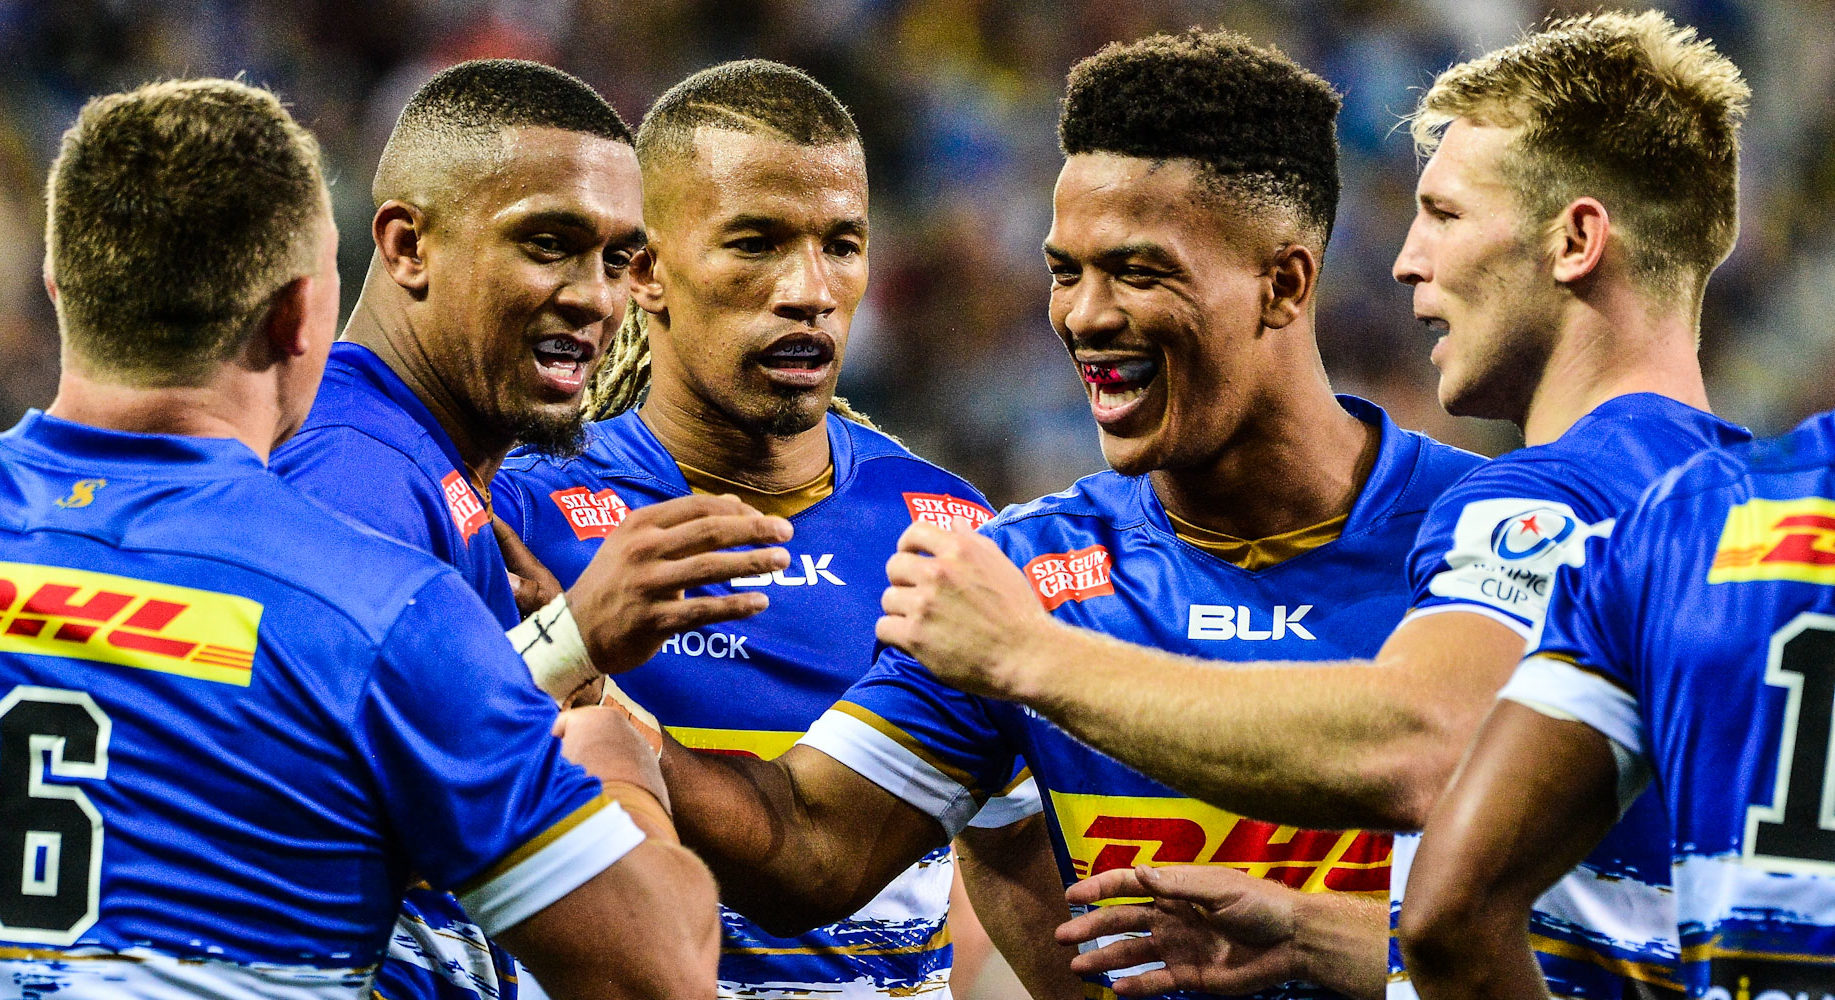 CAPE TOWN, SOUTH AFRICA - DECEMBER 17: Leolin Zas of DHL Stormers celebrates scoring a try with teammates during the Heineken Champions Cup match between DHL Stormers and London Irish at DHL Cape Town Stadium on December 17, 2022 in Cape Town, South Africa. (Photo by Grant Pitcher/Gallo Images).